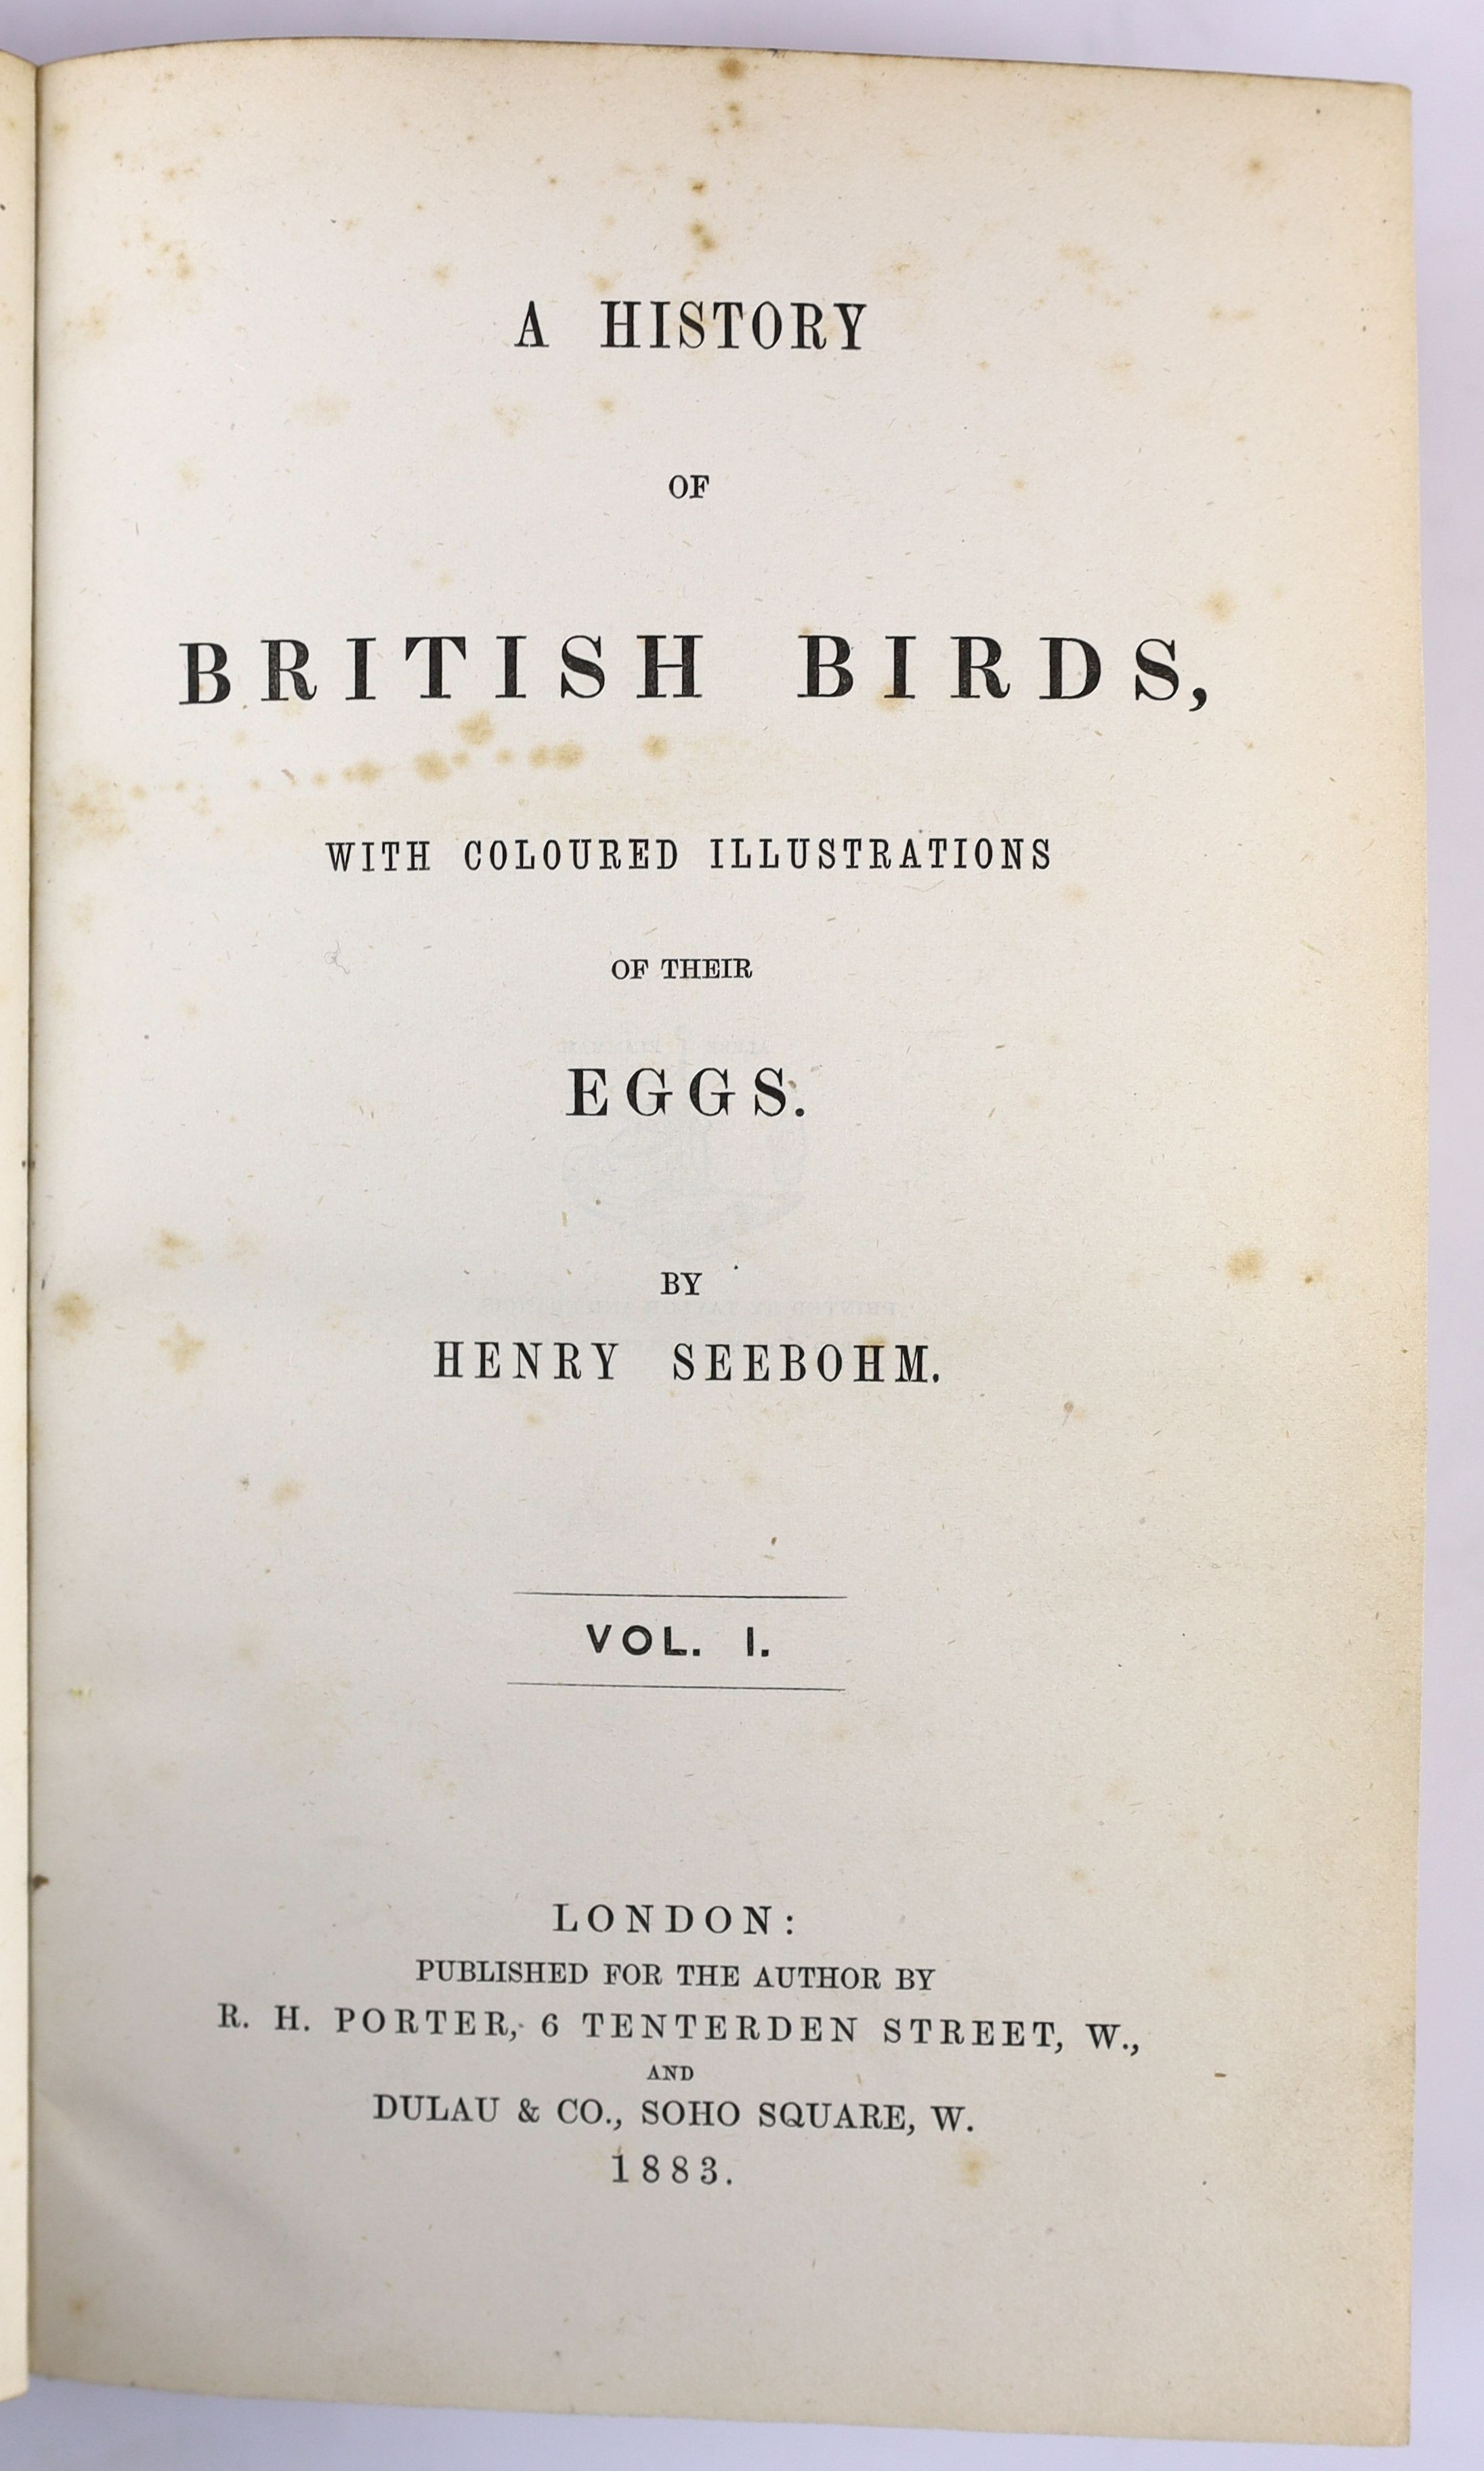 Seebohm, Henry - A History of British Birds, 1st edition, 4 vols, half red morocco gilt, with 68 coloured plates, some foxing and a few pencil annotations, bookplate of Mr. Justice Ridley, London, 1883-85